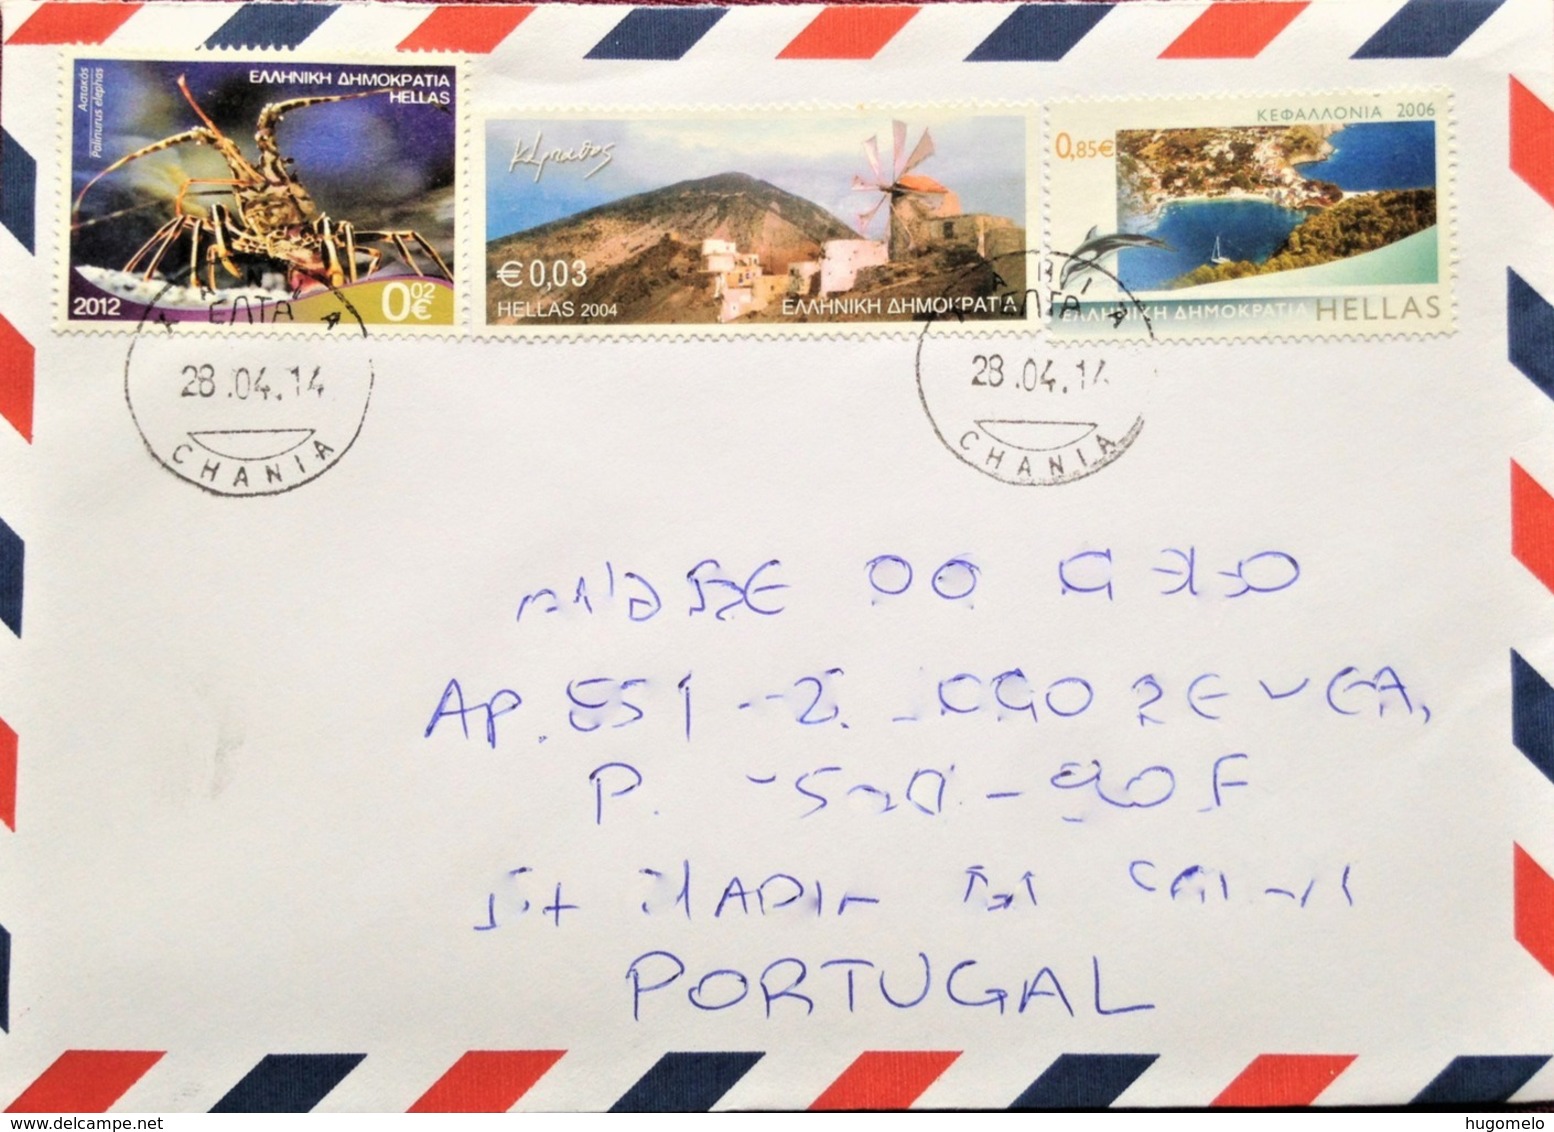 Greece, Circulated Cover To Portugal, "Windmills", "Crustaceans", "Lobsters", "Landscapes", "Kefalonia Island", 2014 - Storia Postale